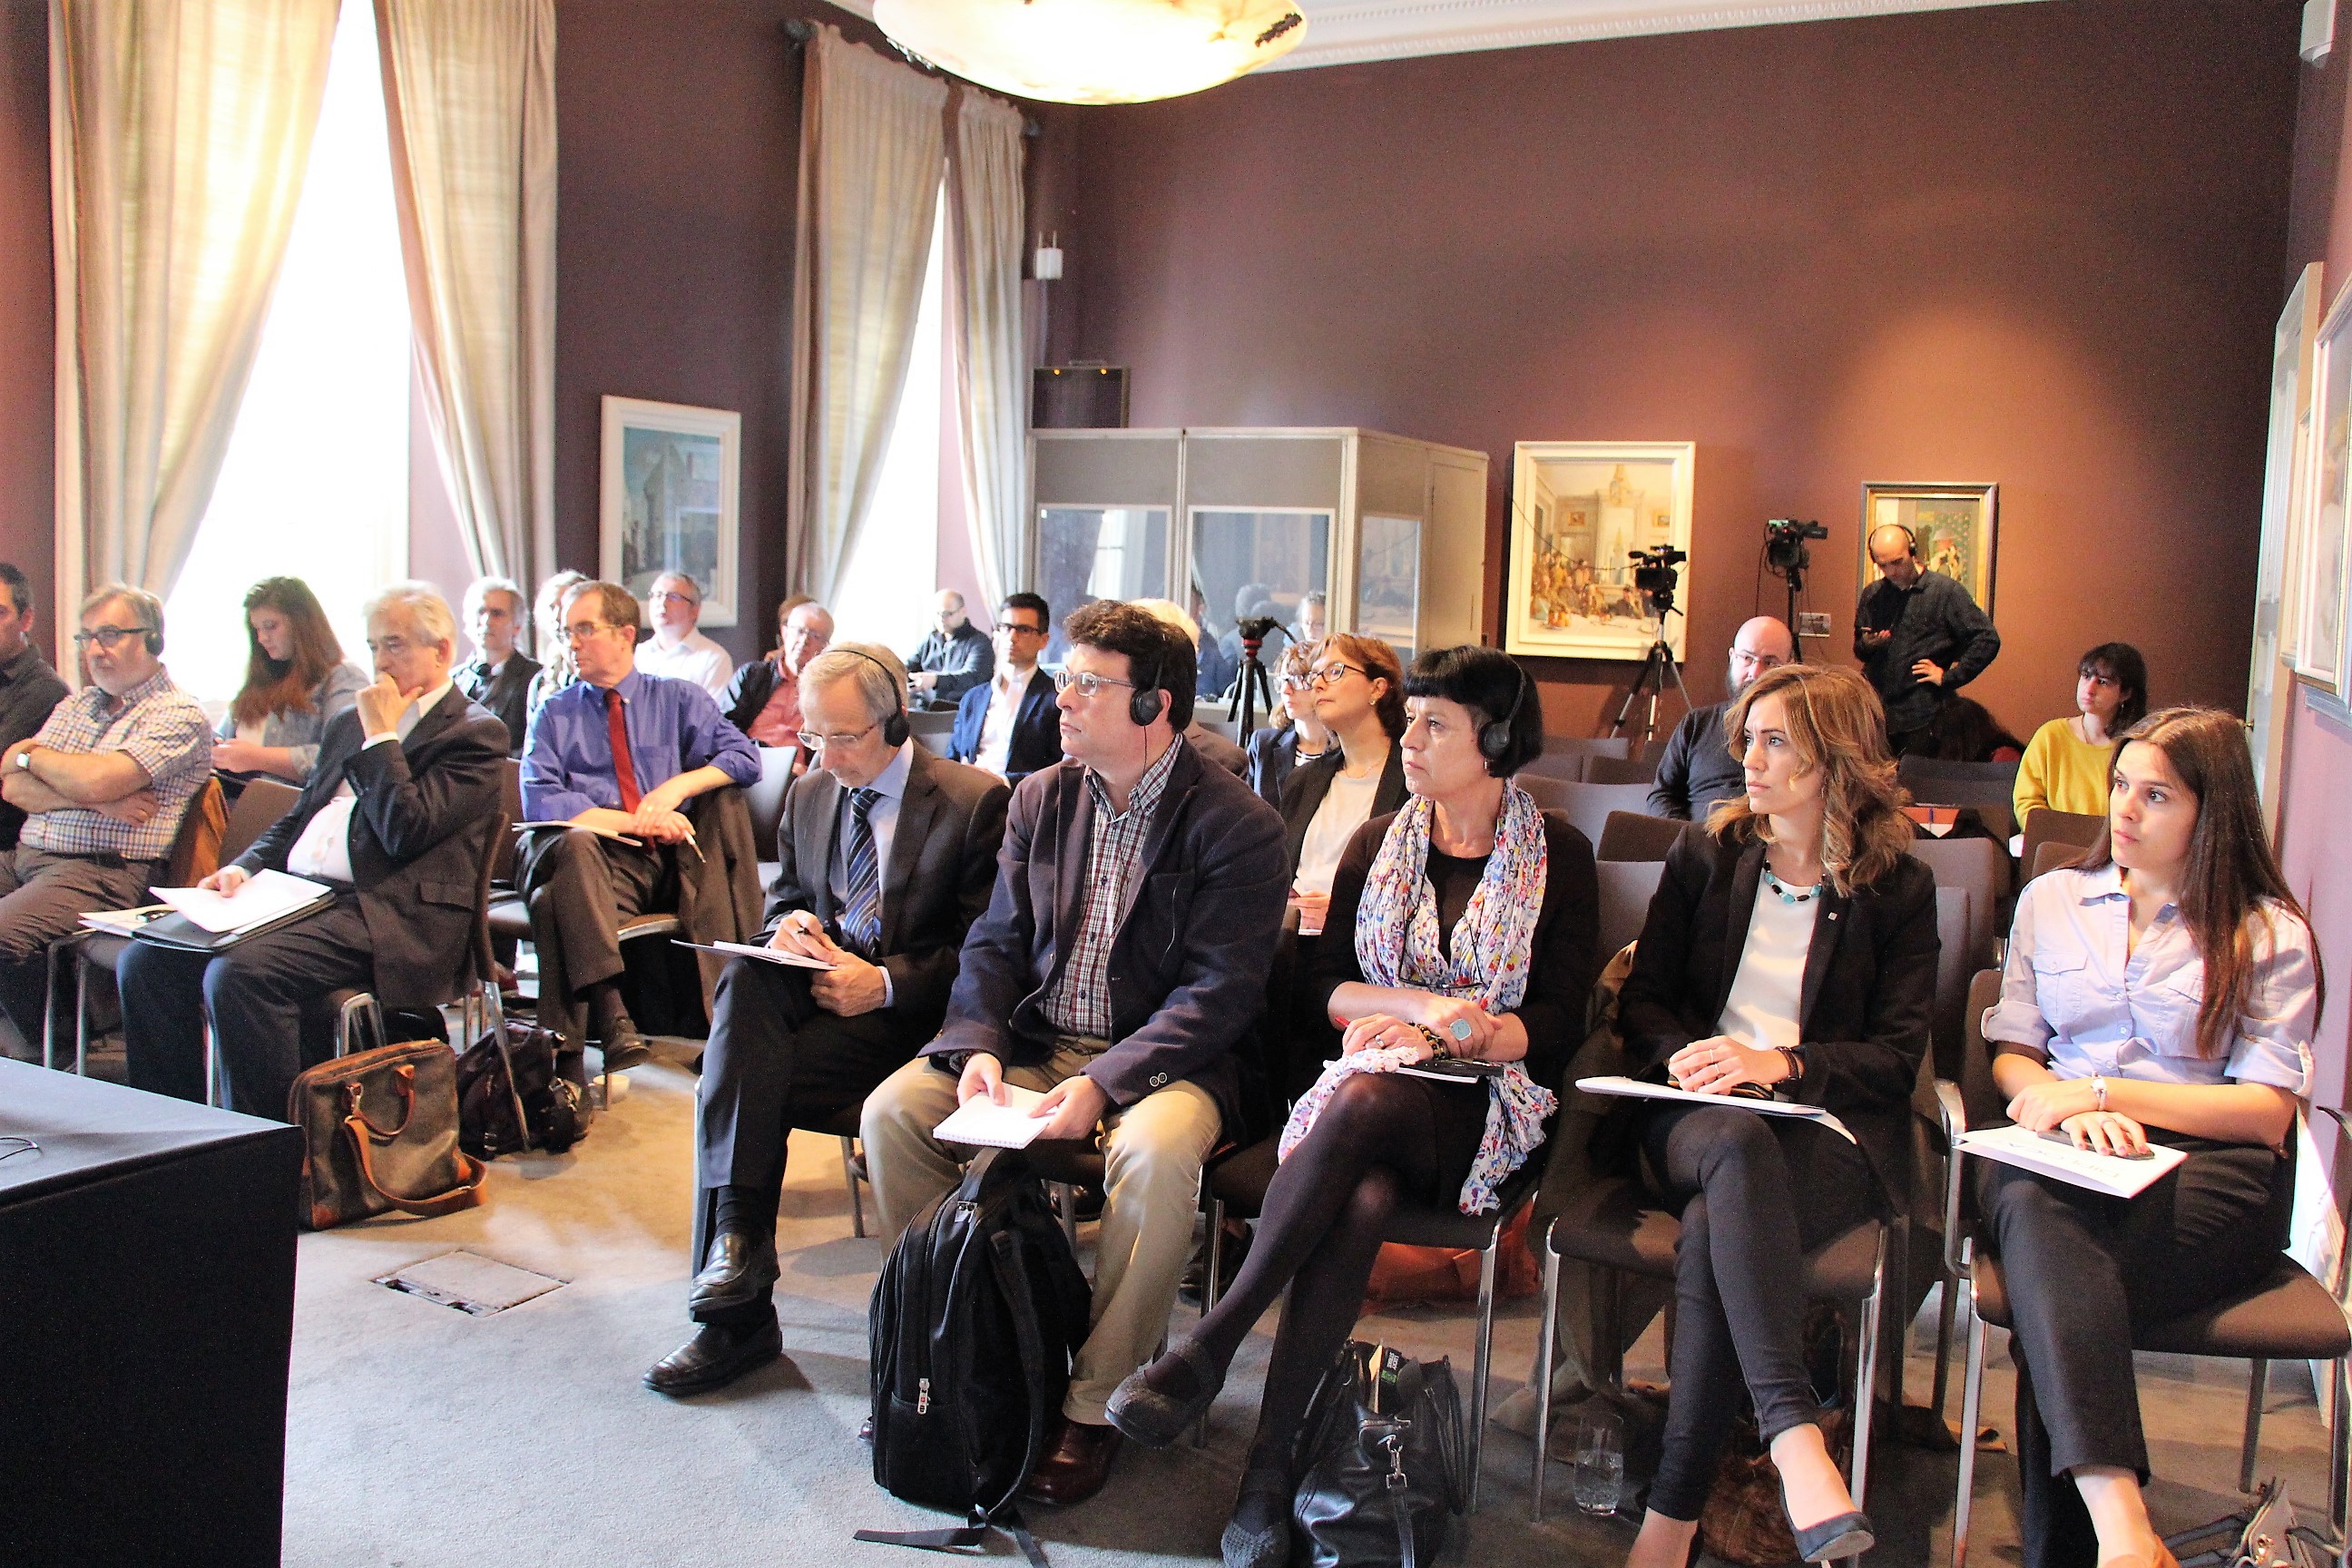 Public attending Diplocat's conference 'The Bombings of Barcelona and London' in London (by ACN)